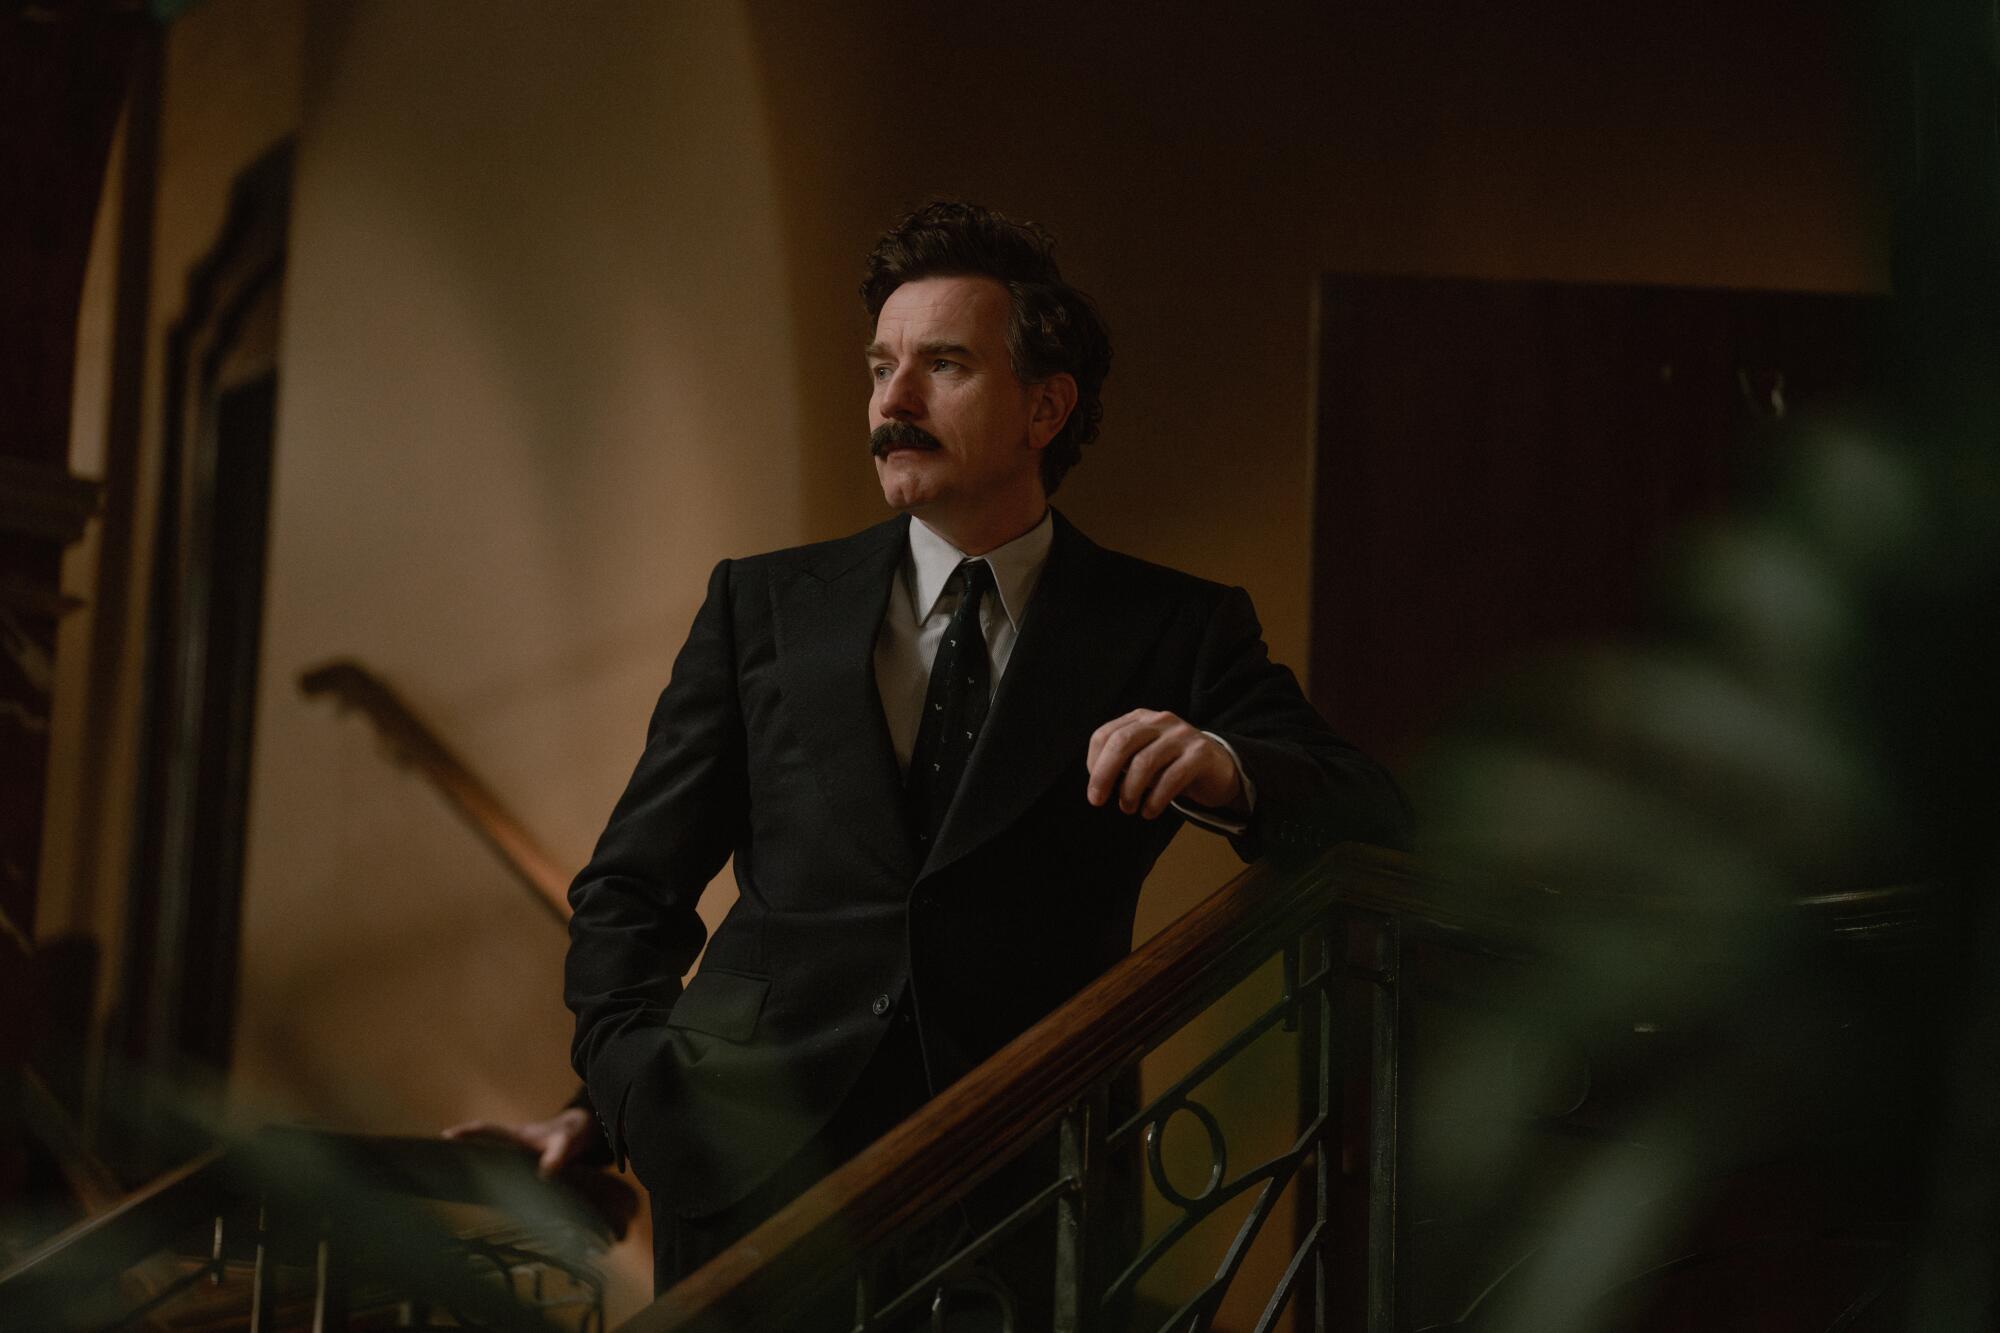 A mustachioed Russian count climbs the stairs of an old-school hotel in "A gentleman in Moscow."